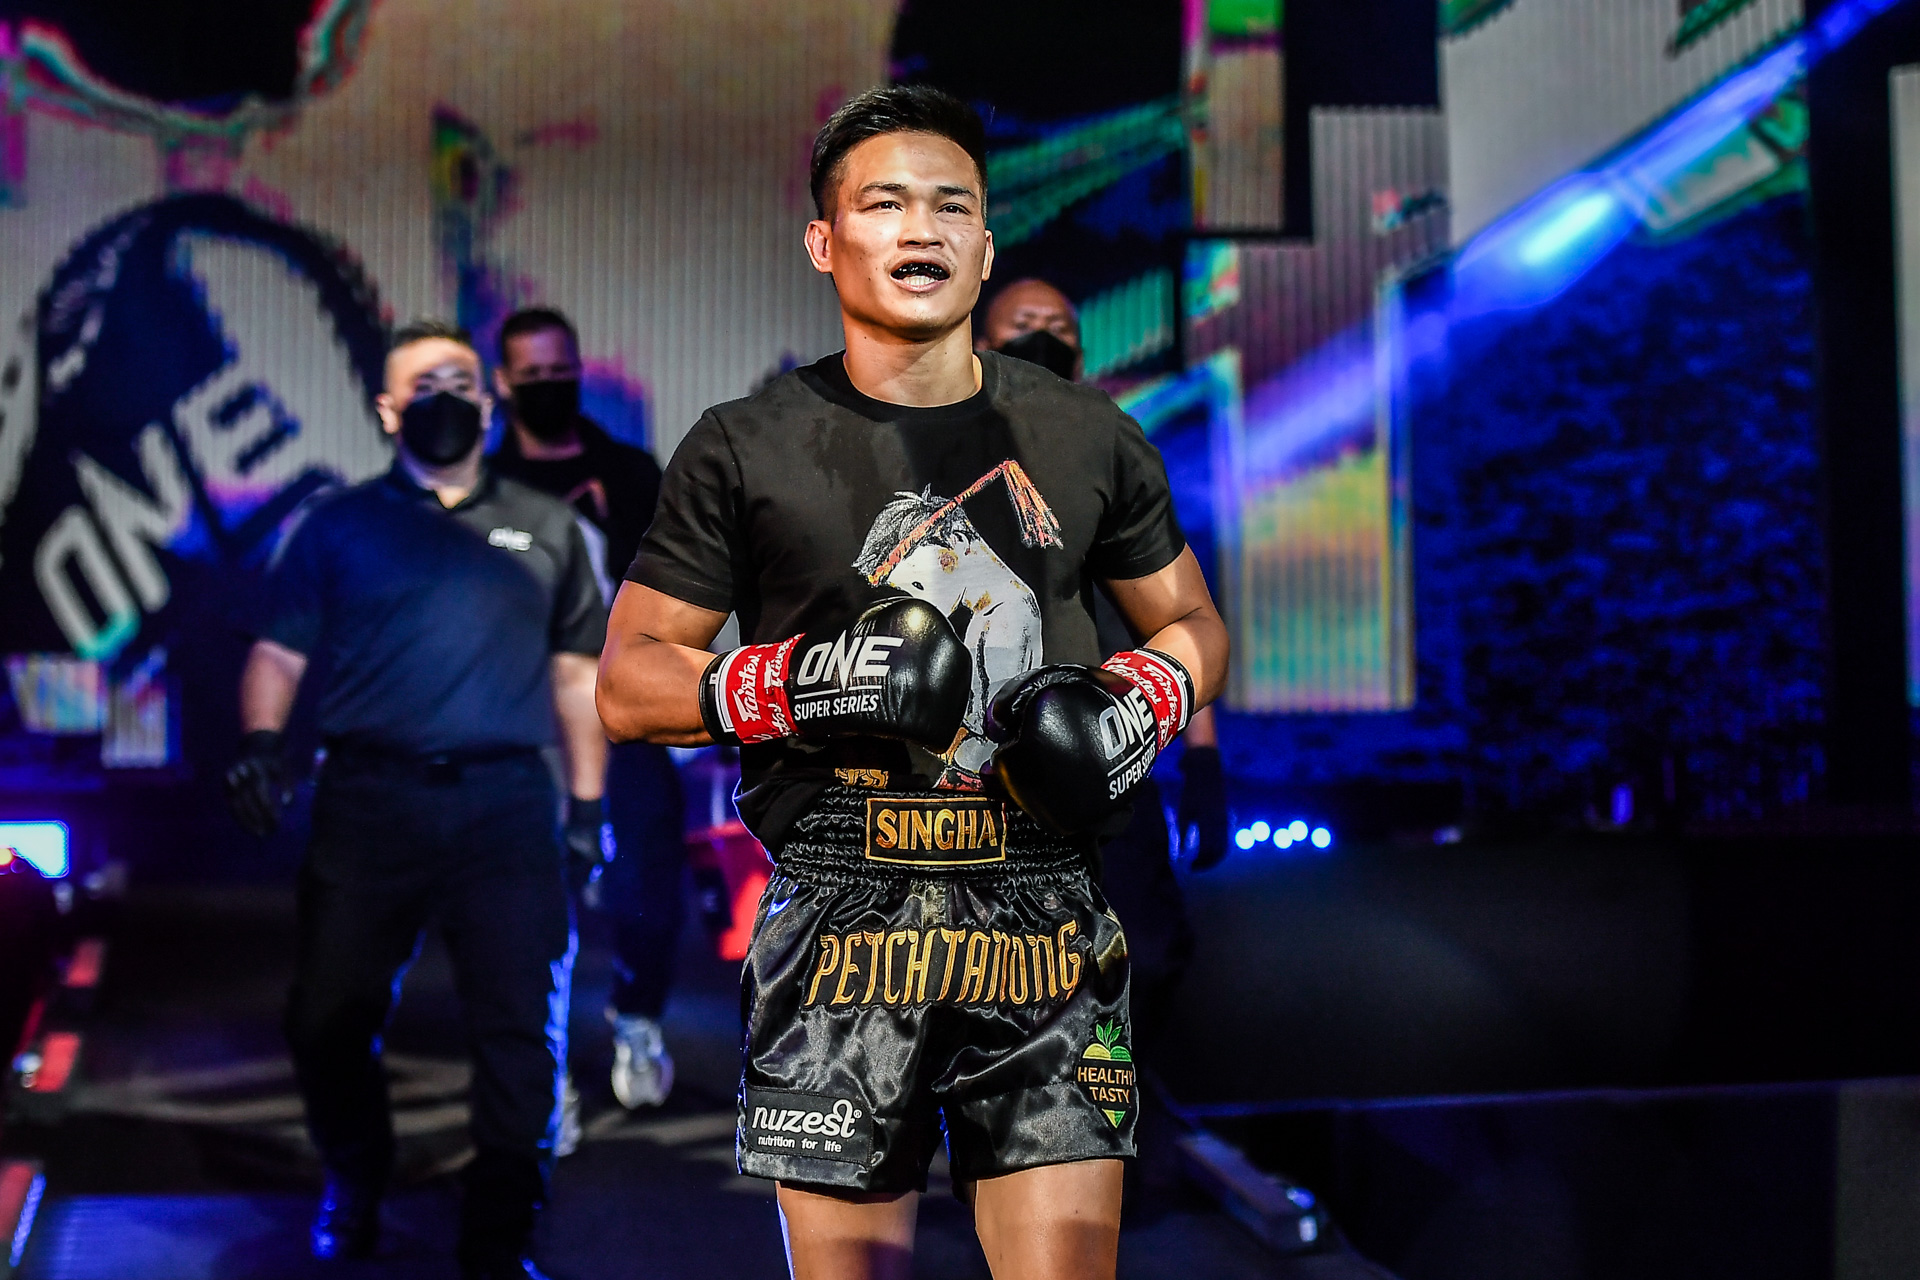 Pictures from the kickboxing clash between Petchtanong and Zhang Chenglong from ONE: REVOLUTION